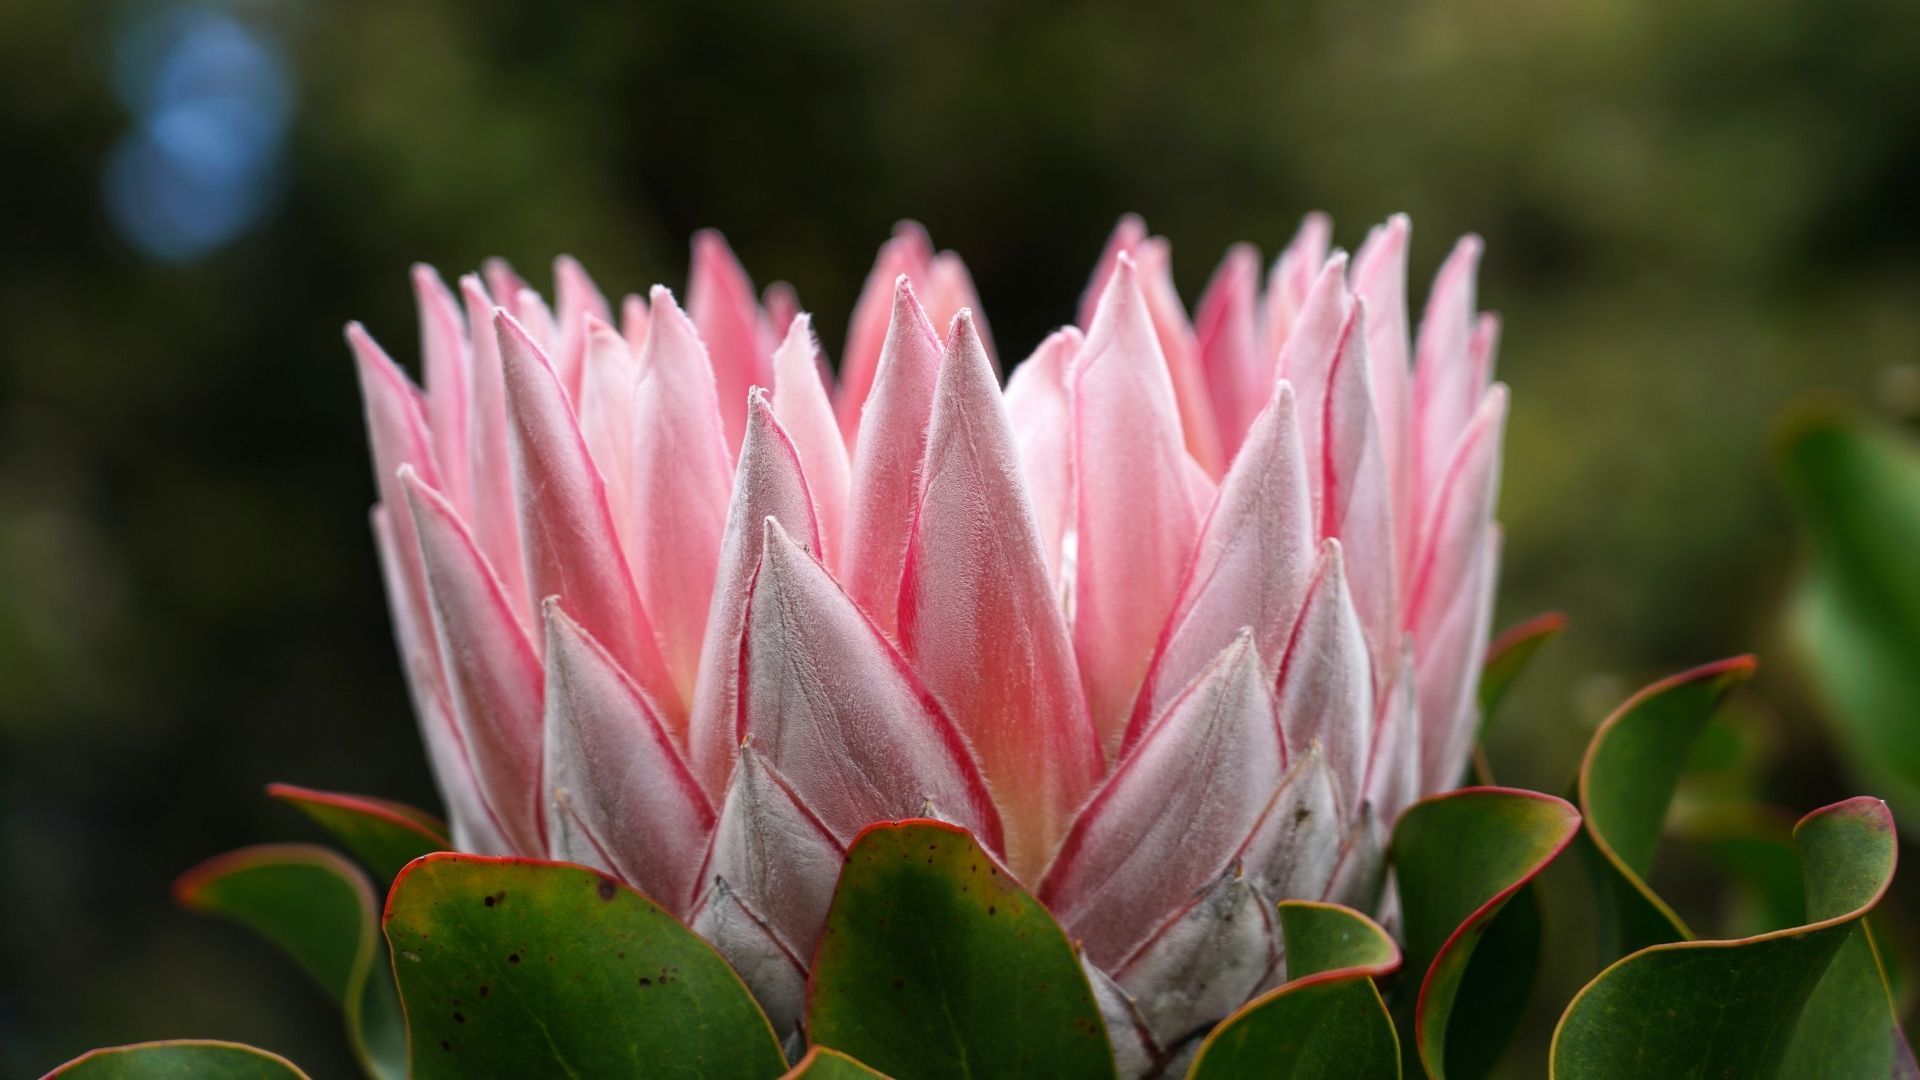 Most beautiful flowers: Proteas